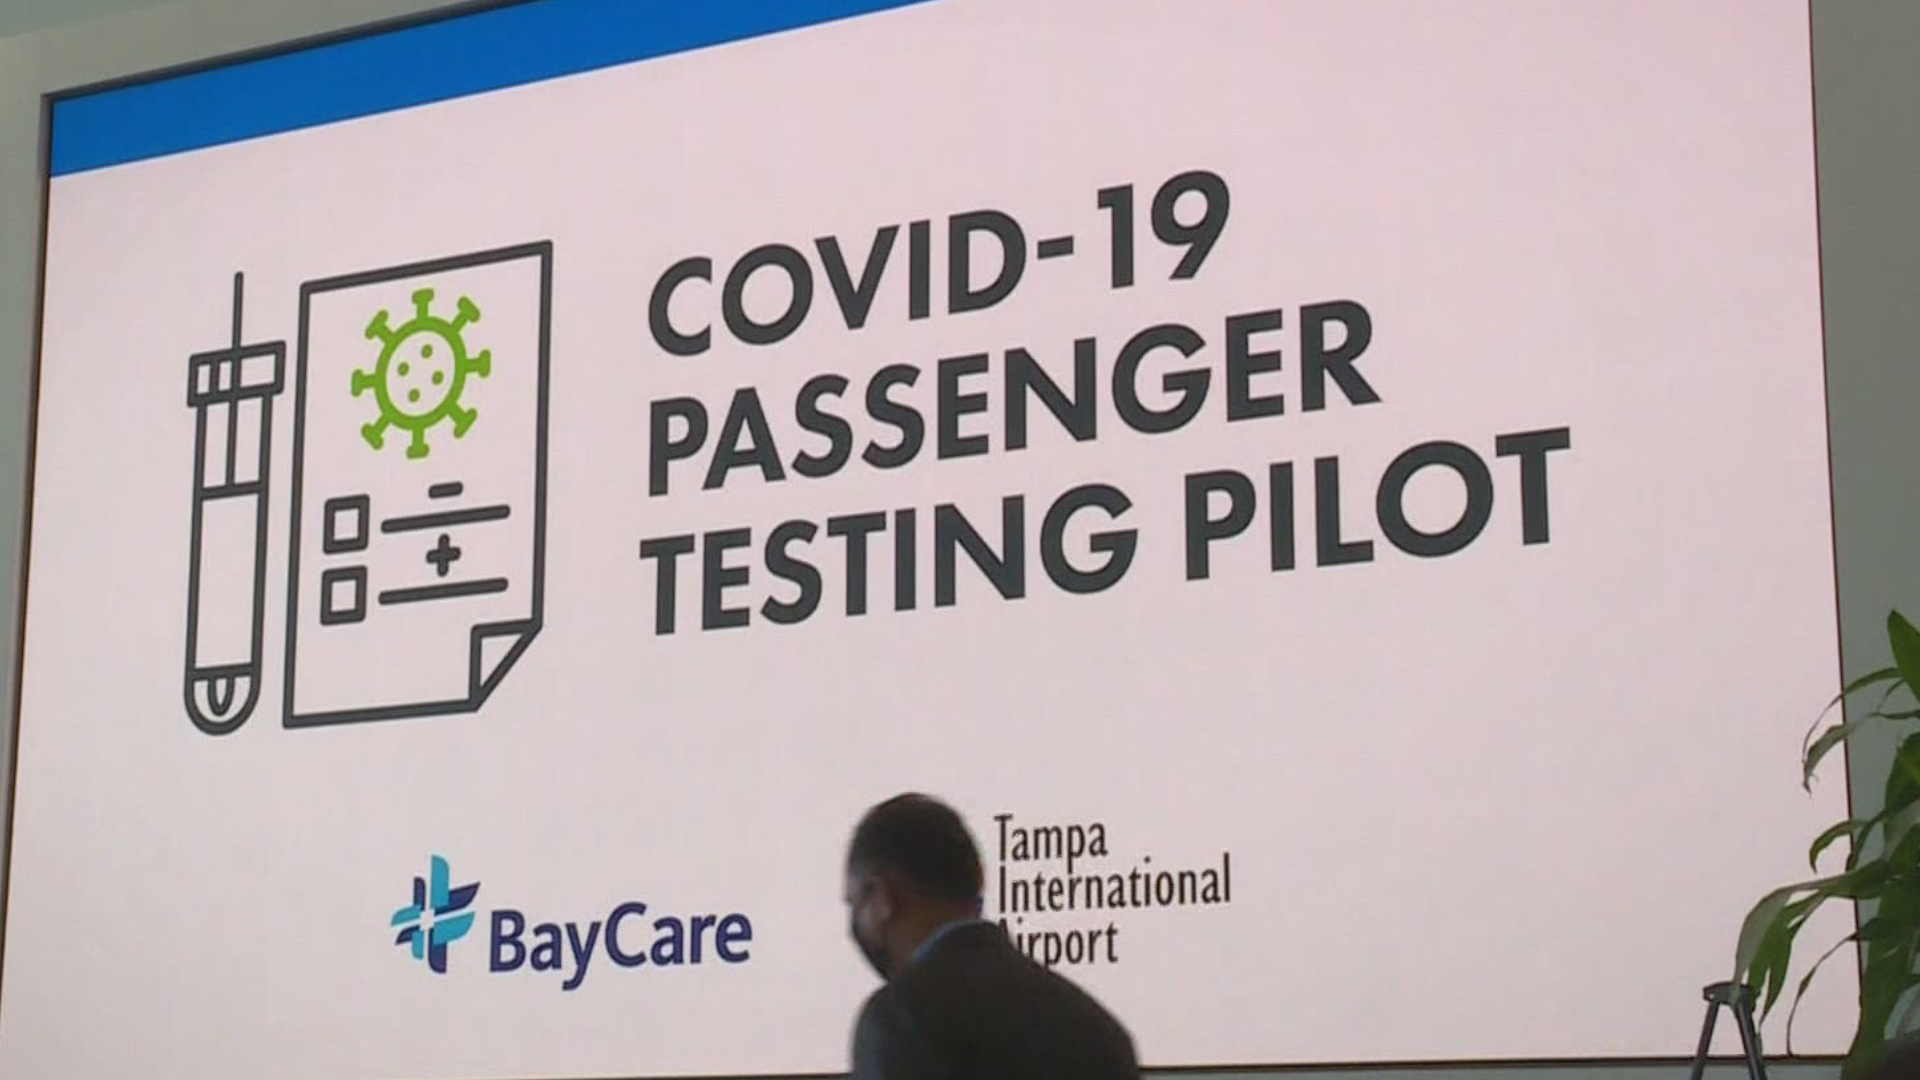 The airport will make two kinds of coronavirus tests available to all passengers.